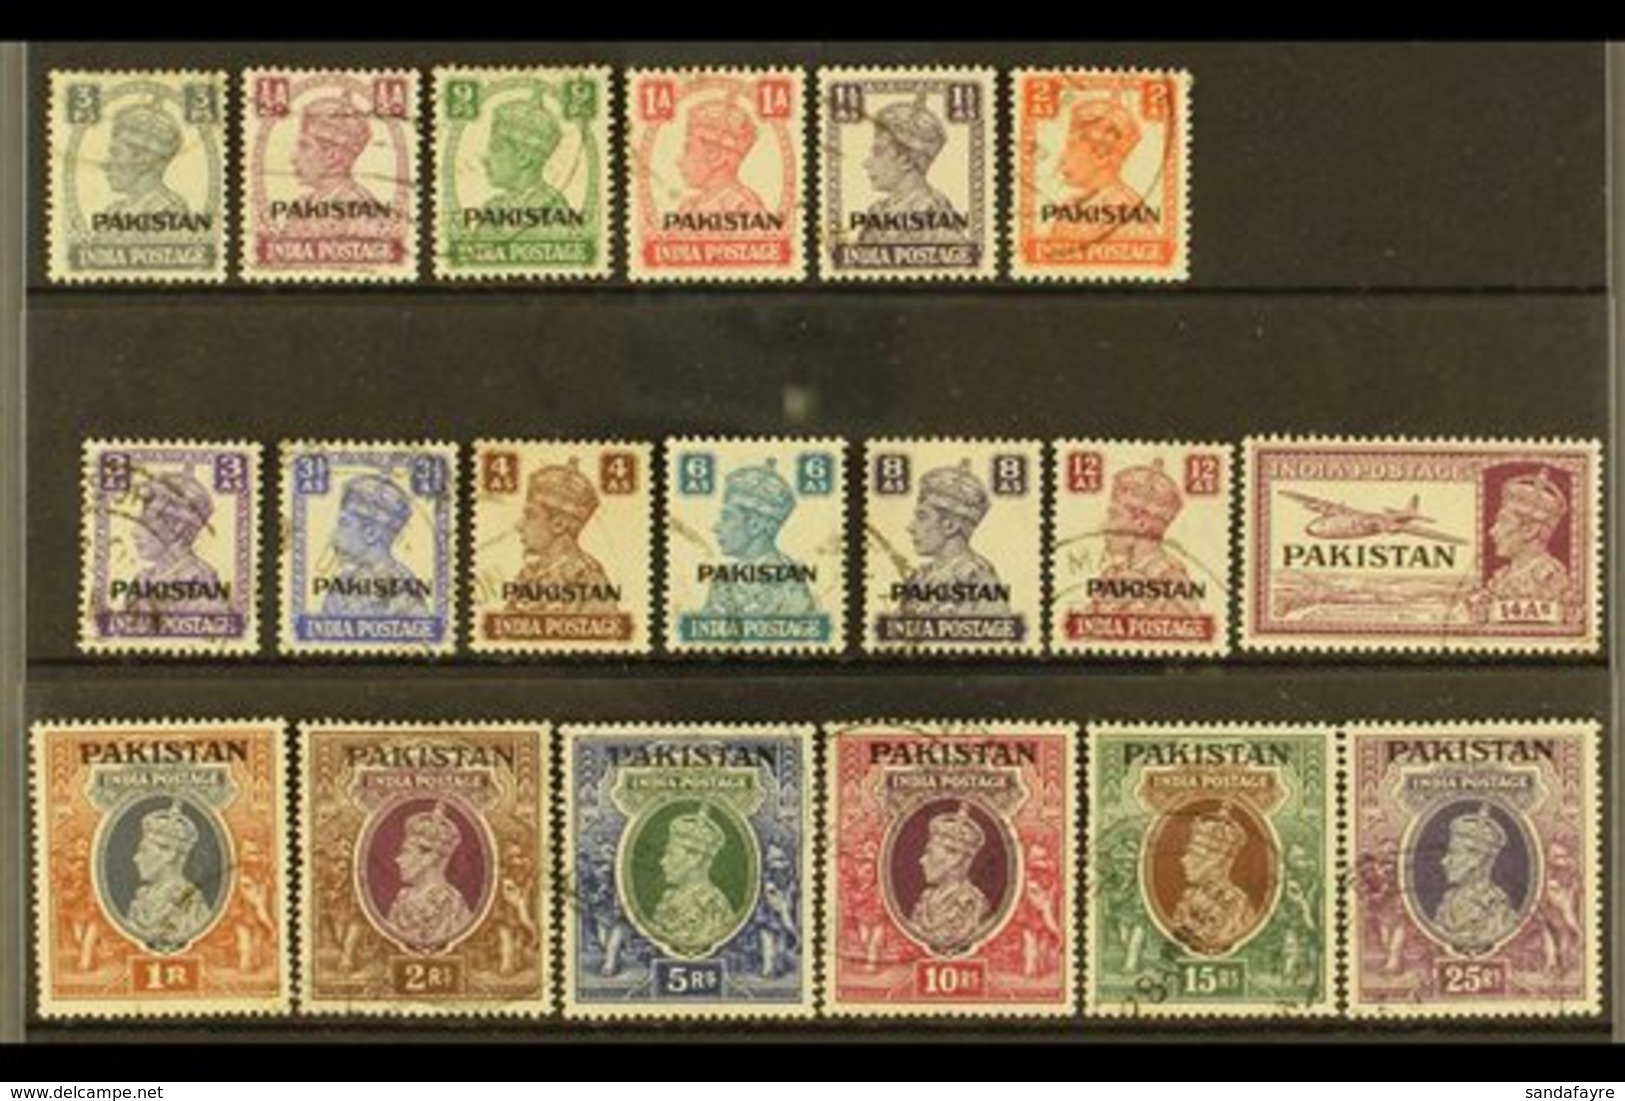 1948  KGV Of India Opt'd Complete Set, SG 1/19, 15r With A Short Perf, The Rest Are Fine Used (19 Stamps) For More Image - Pakistan